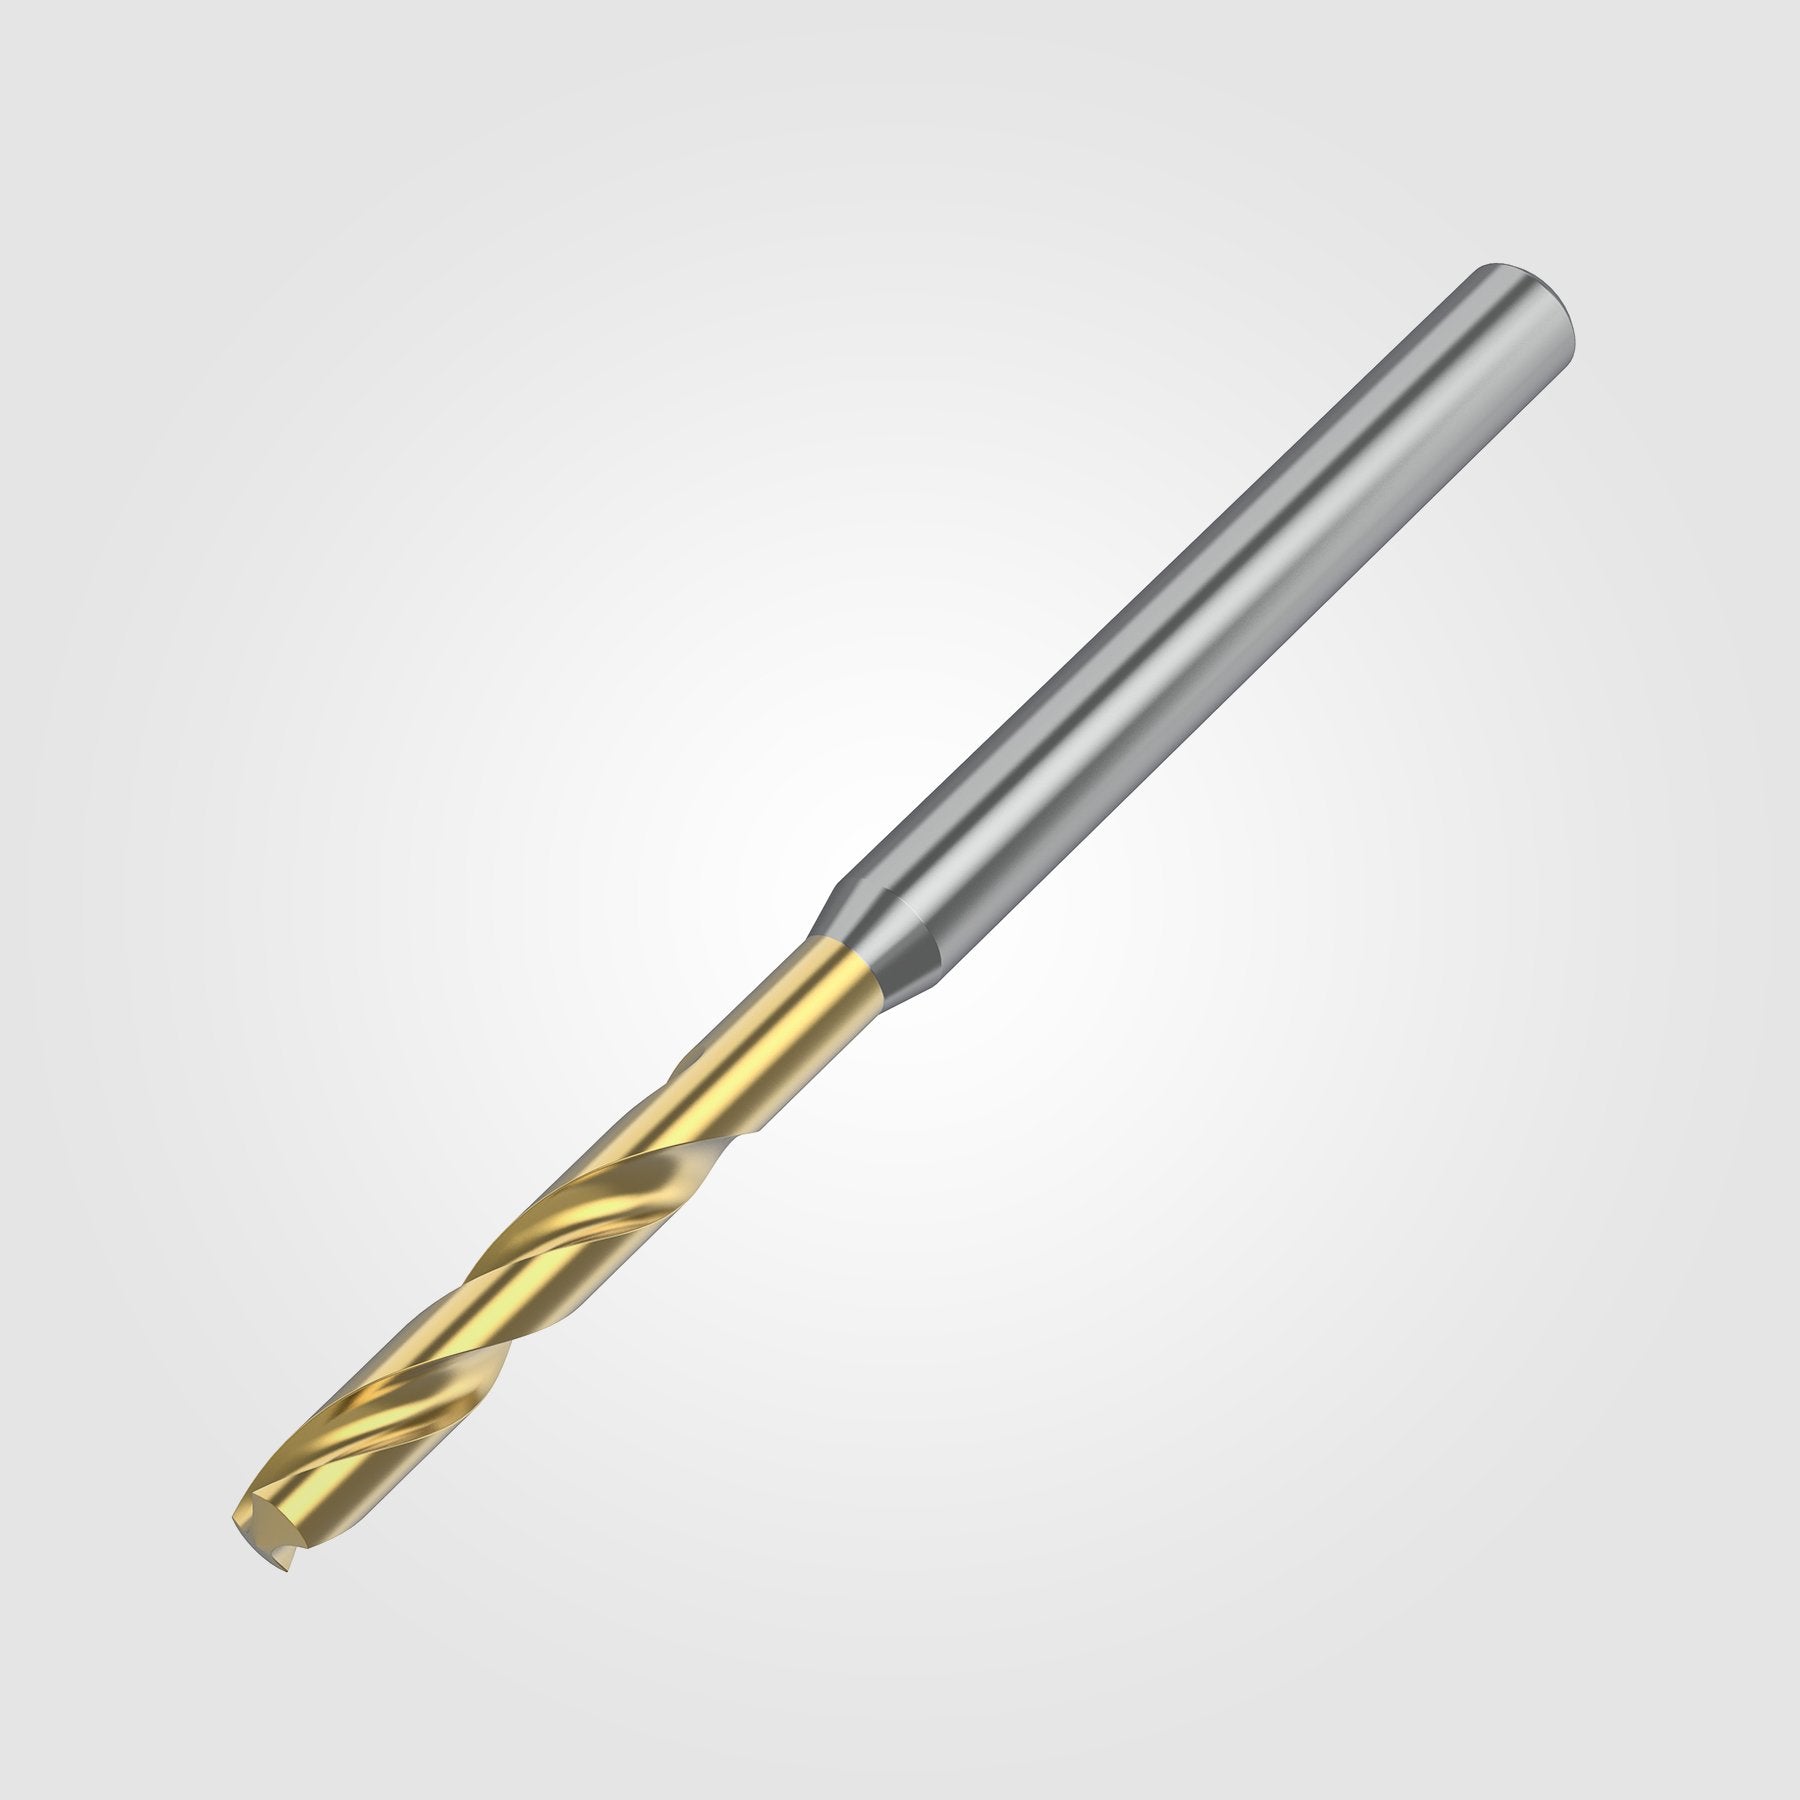 GOdrill (THROUGH COOLANT) | 19.5mm / .7677" / 3xD | SOLID CARBIDE DRILL | 4148593